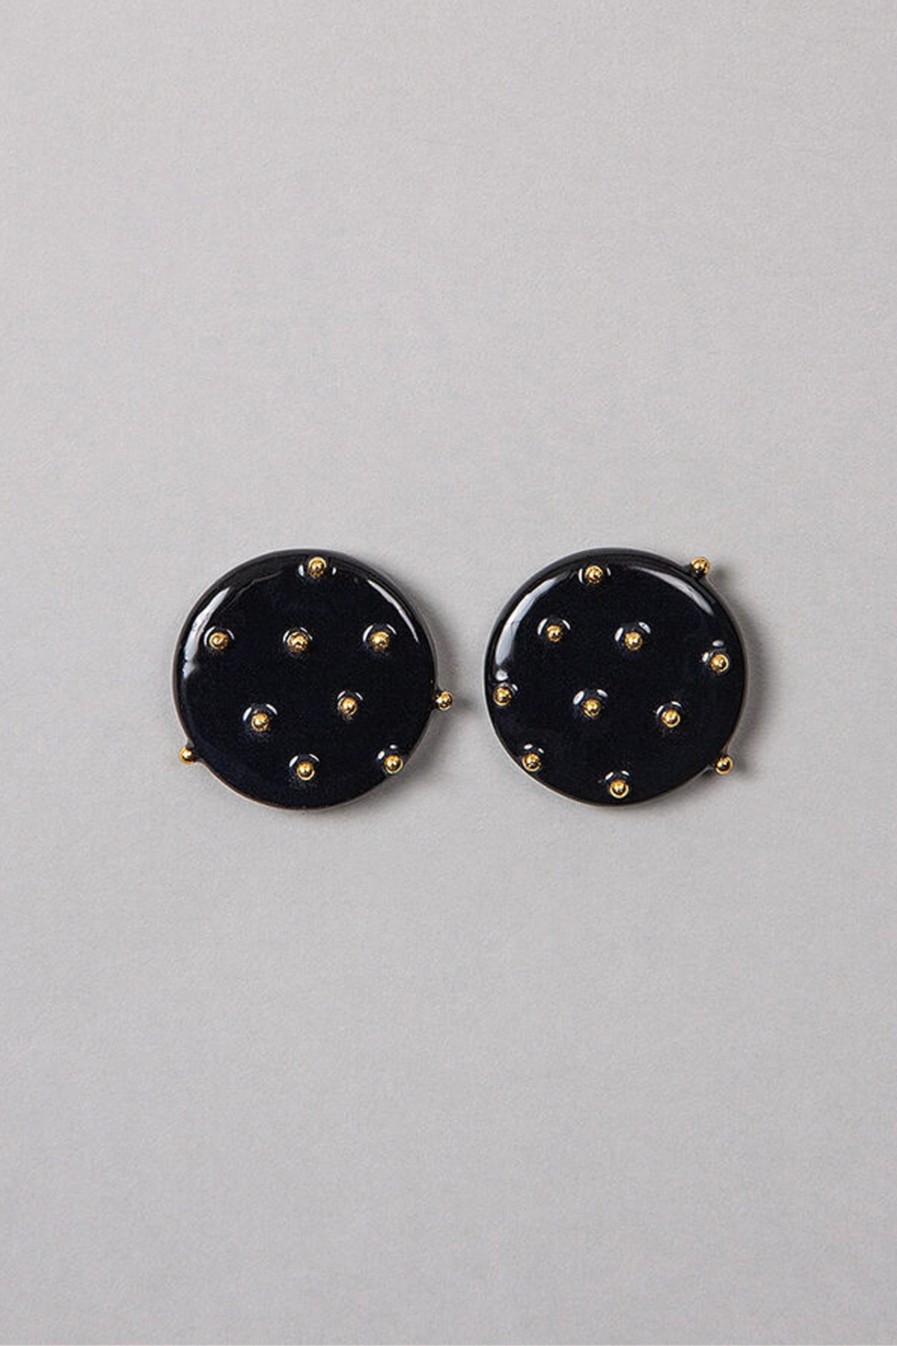 ABE Earrings black circle / gold accents